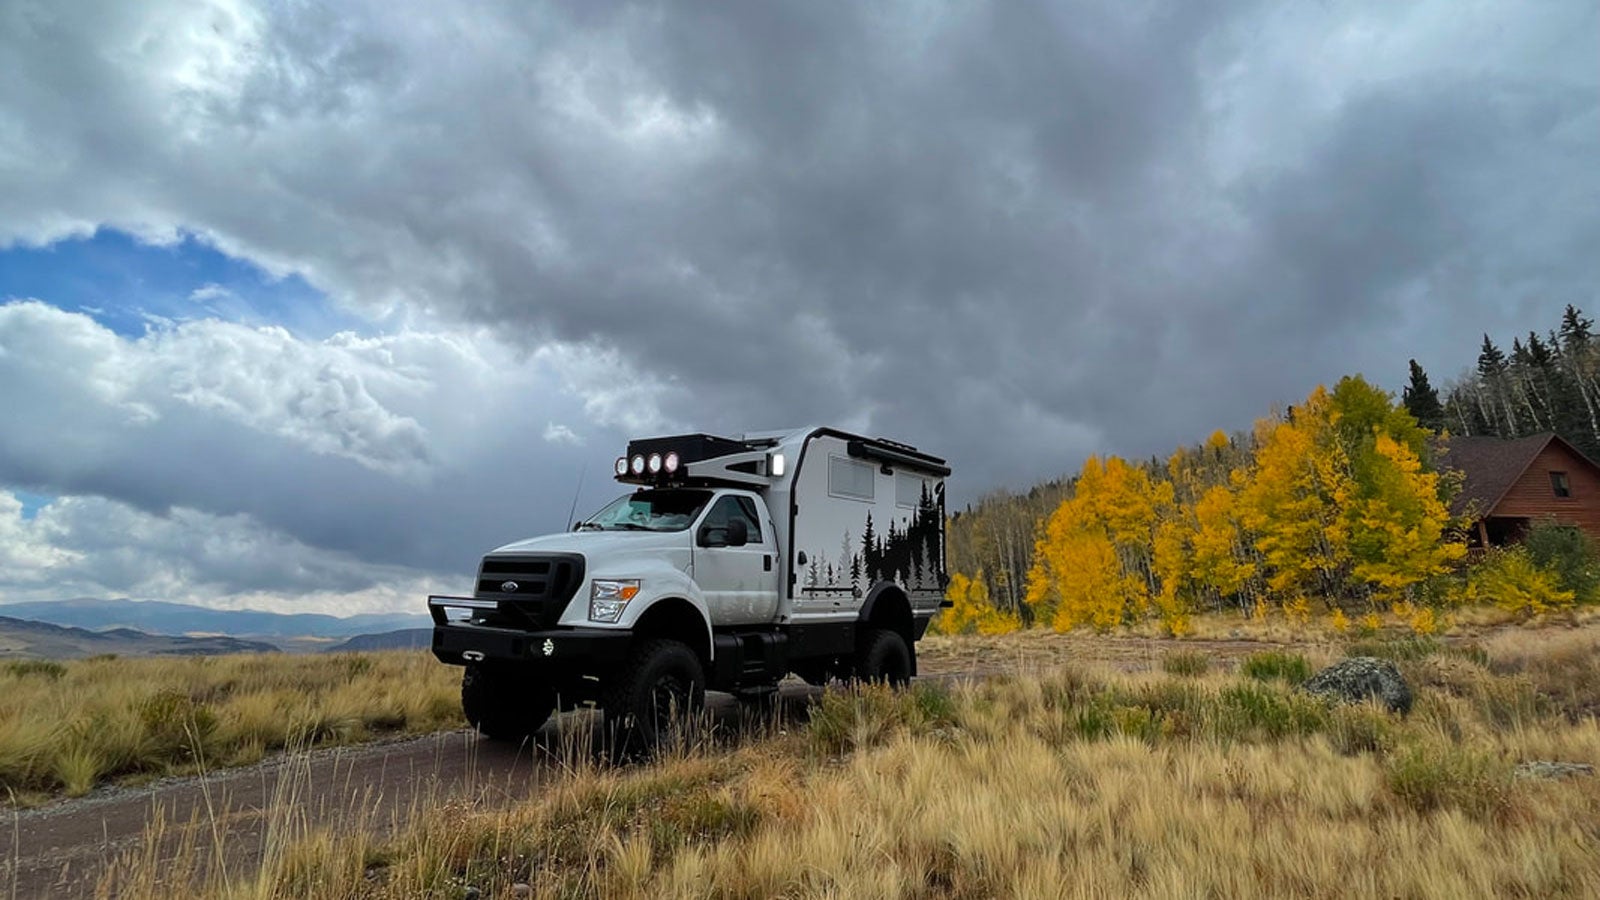 This F-750-Based Camper Is The Perfect Overlander For The Impending Apocalypse